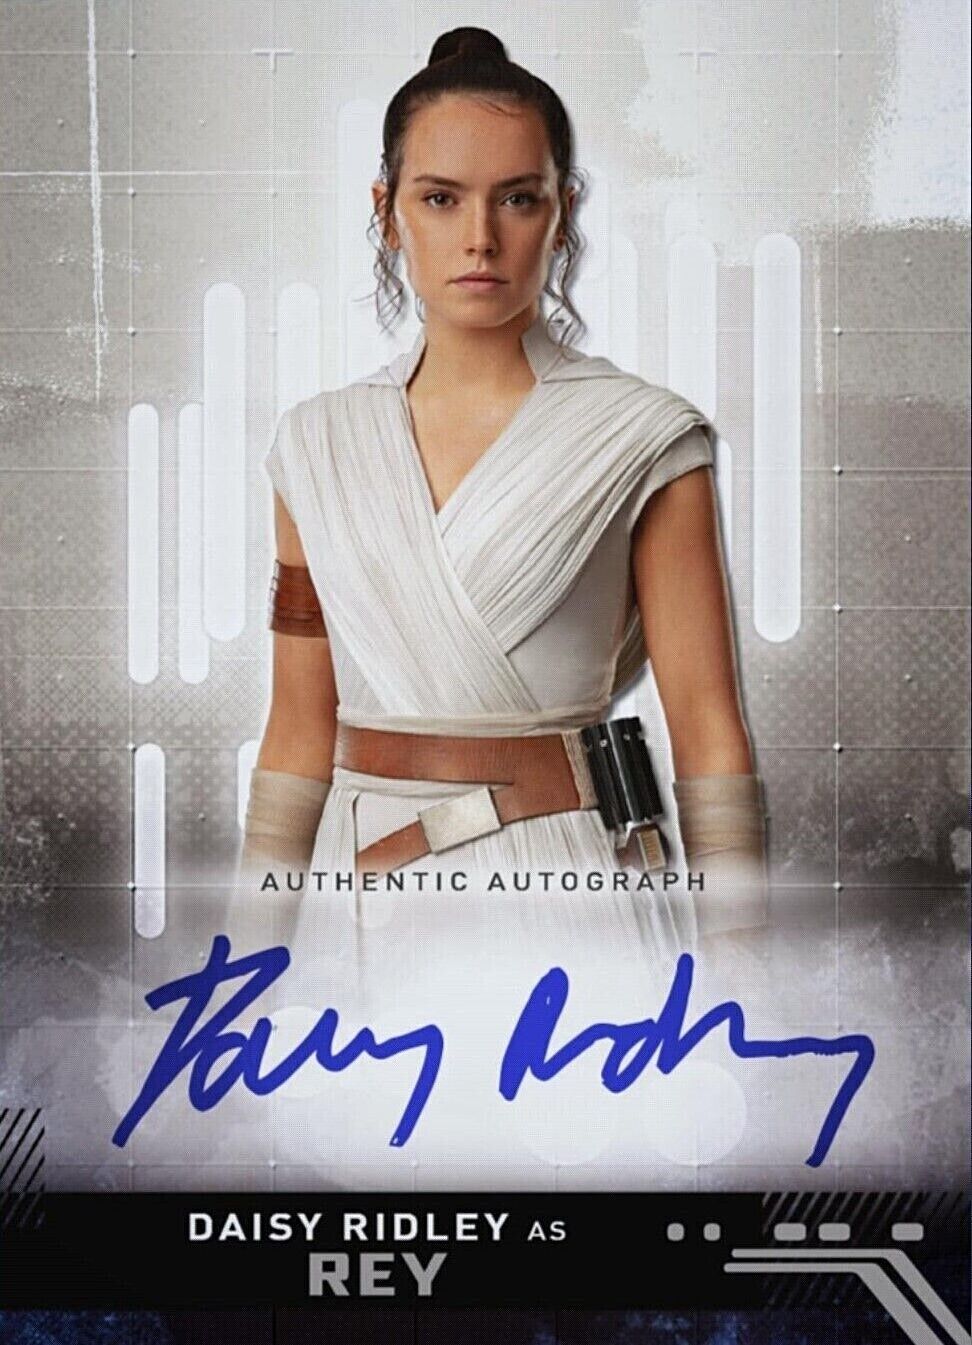 Topps Star Wars Card DAISY RIDLEY Authentic Autograph as REY SIG Digital Card